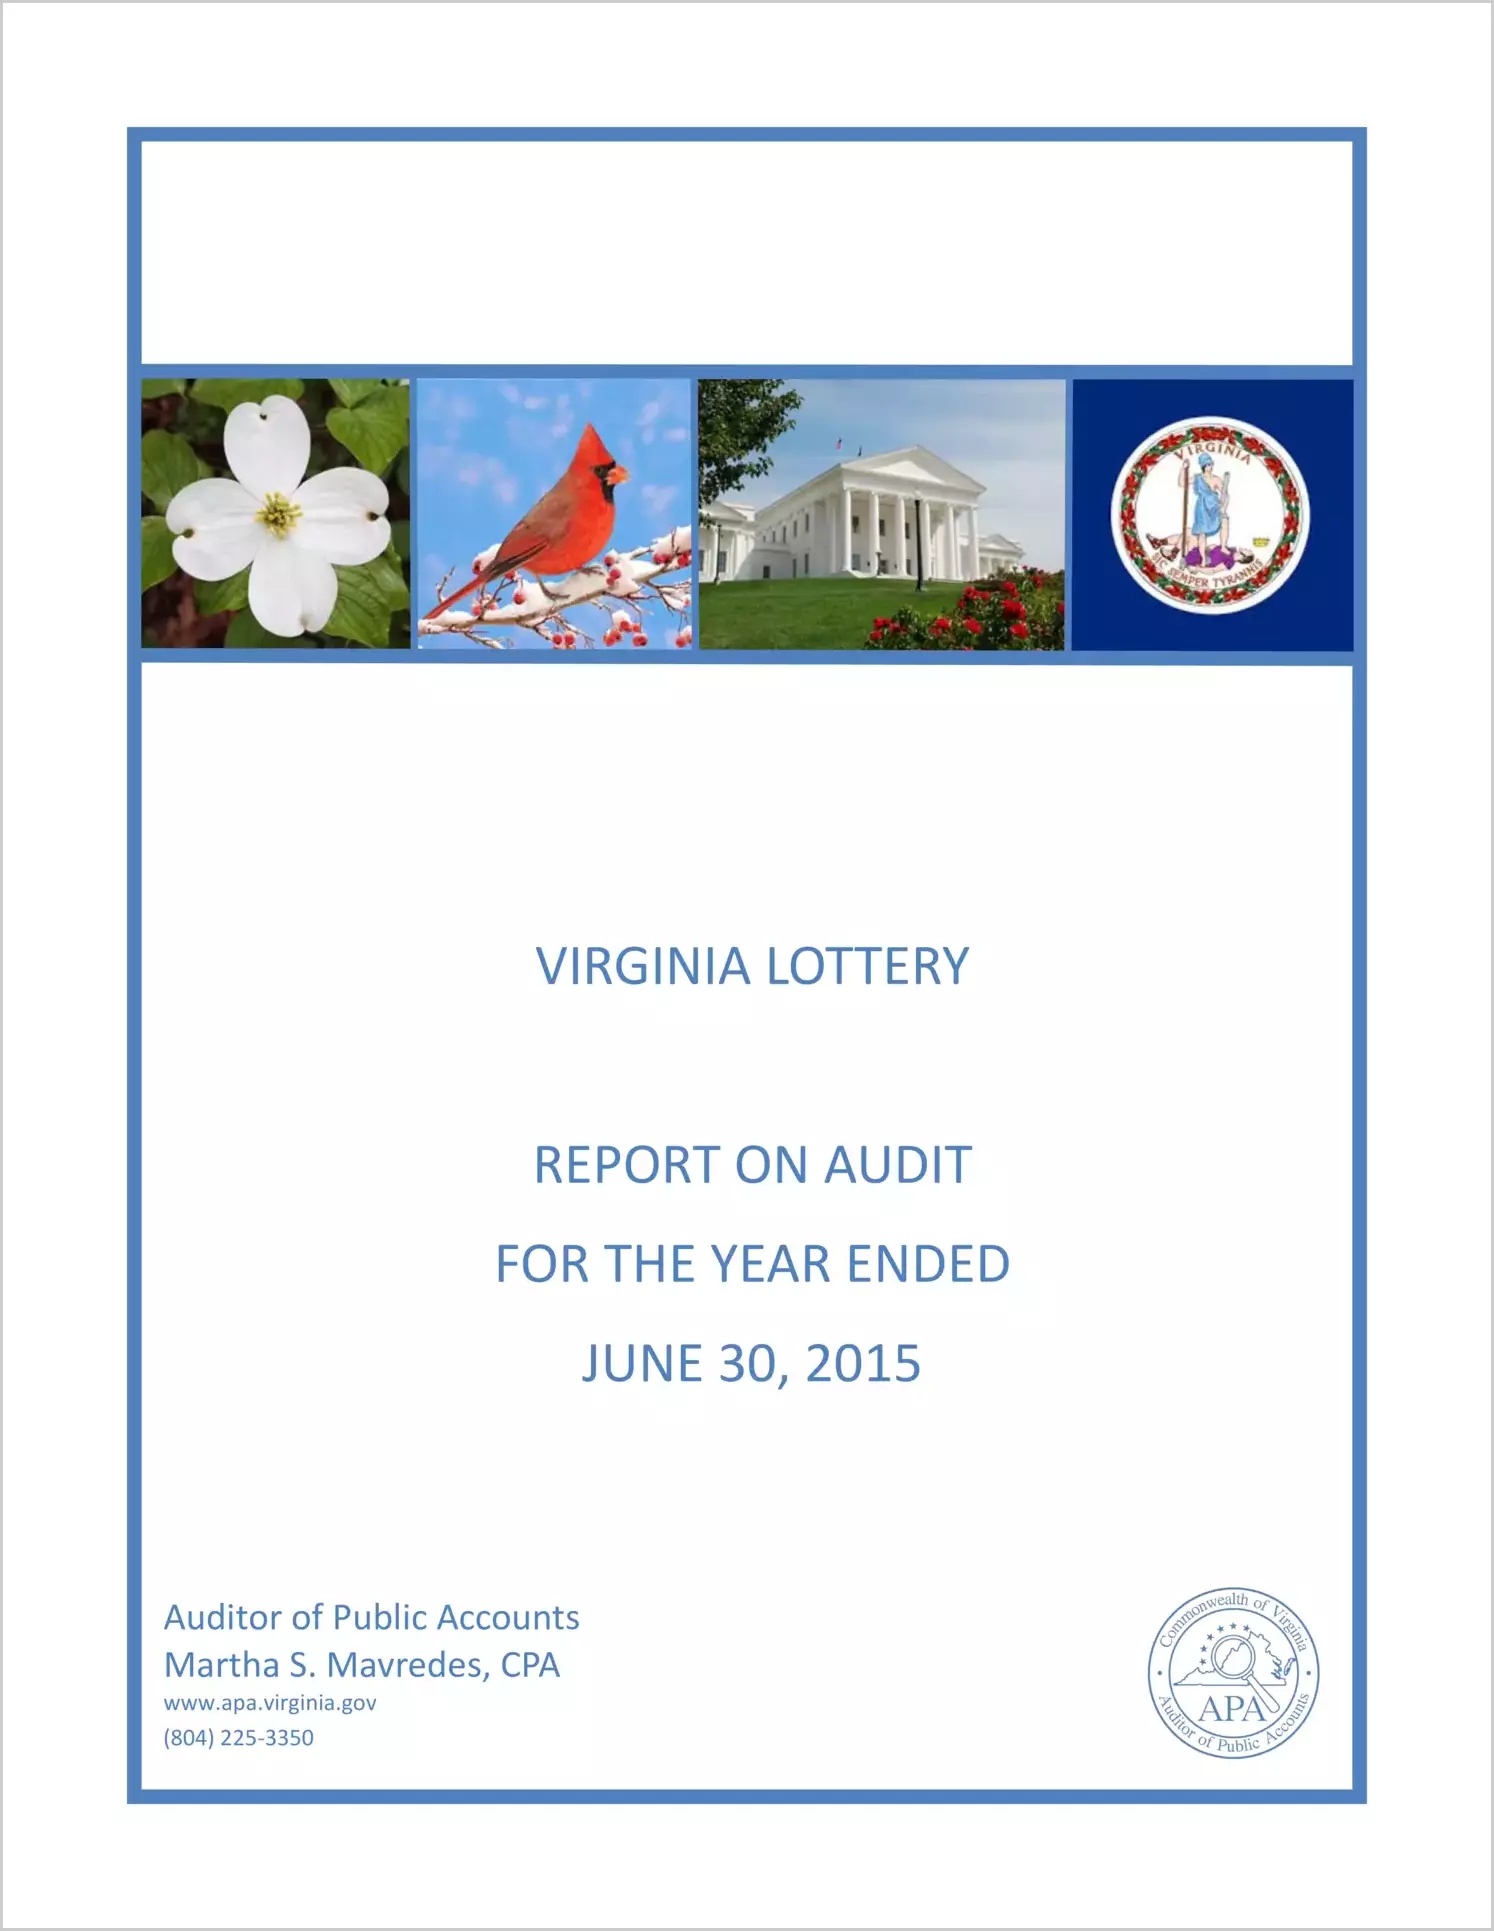 Virginia State Lottery Department for the year ended June 30, 2015